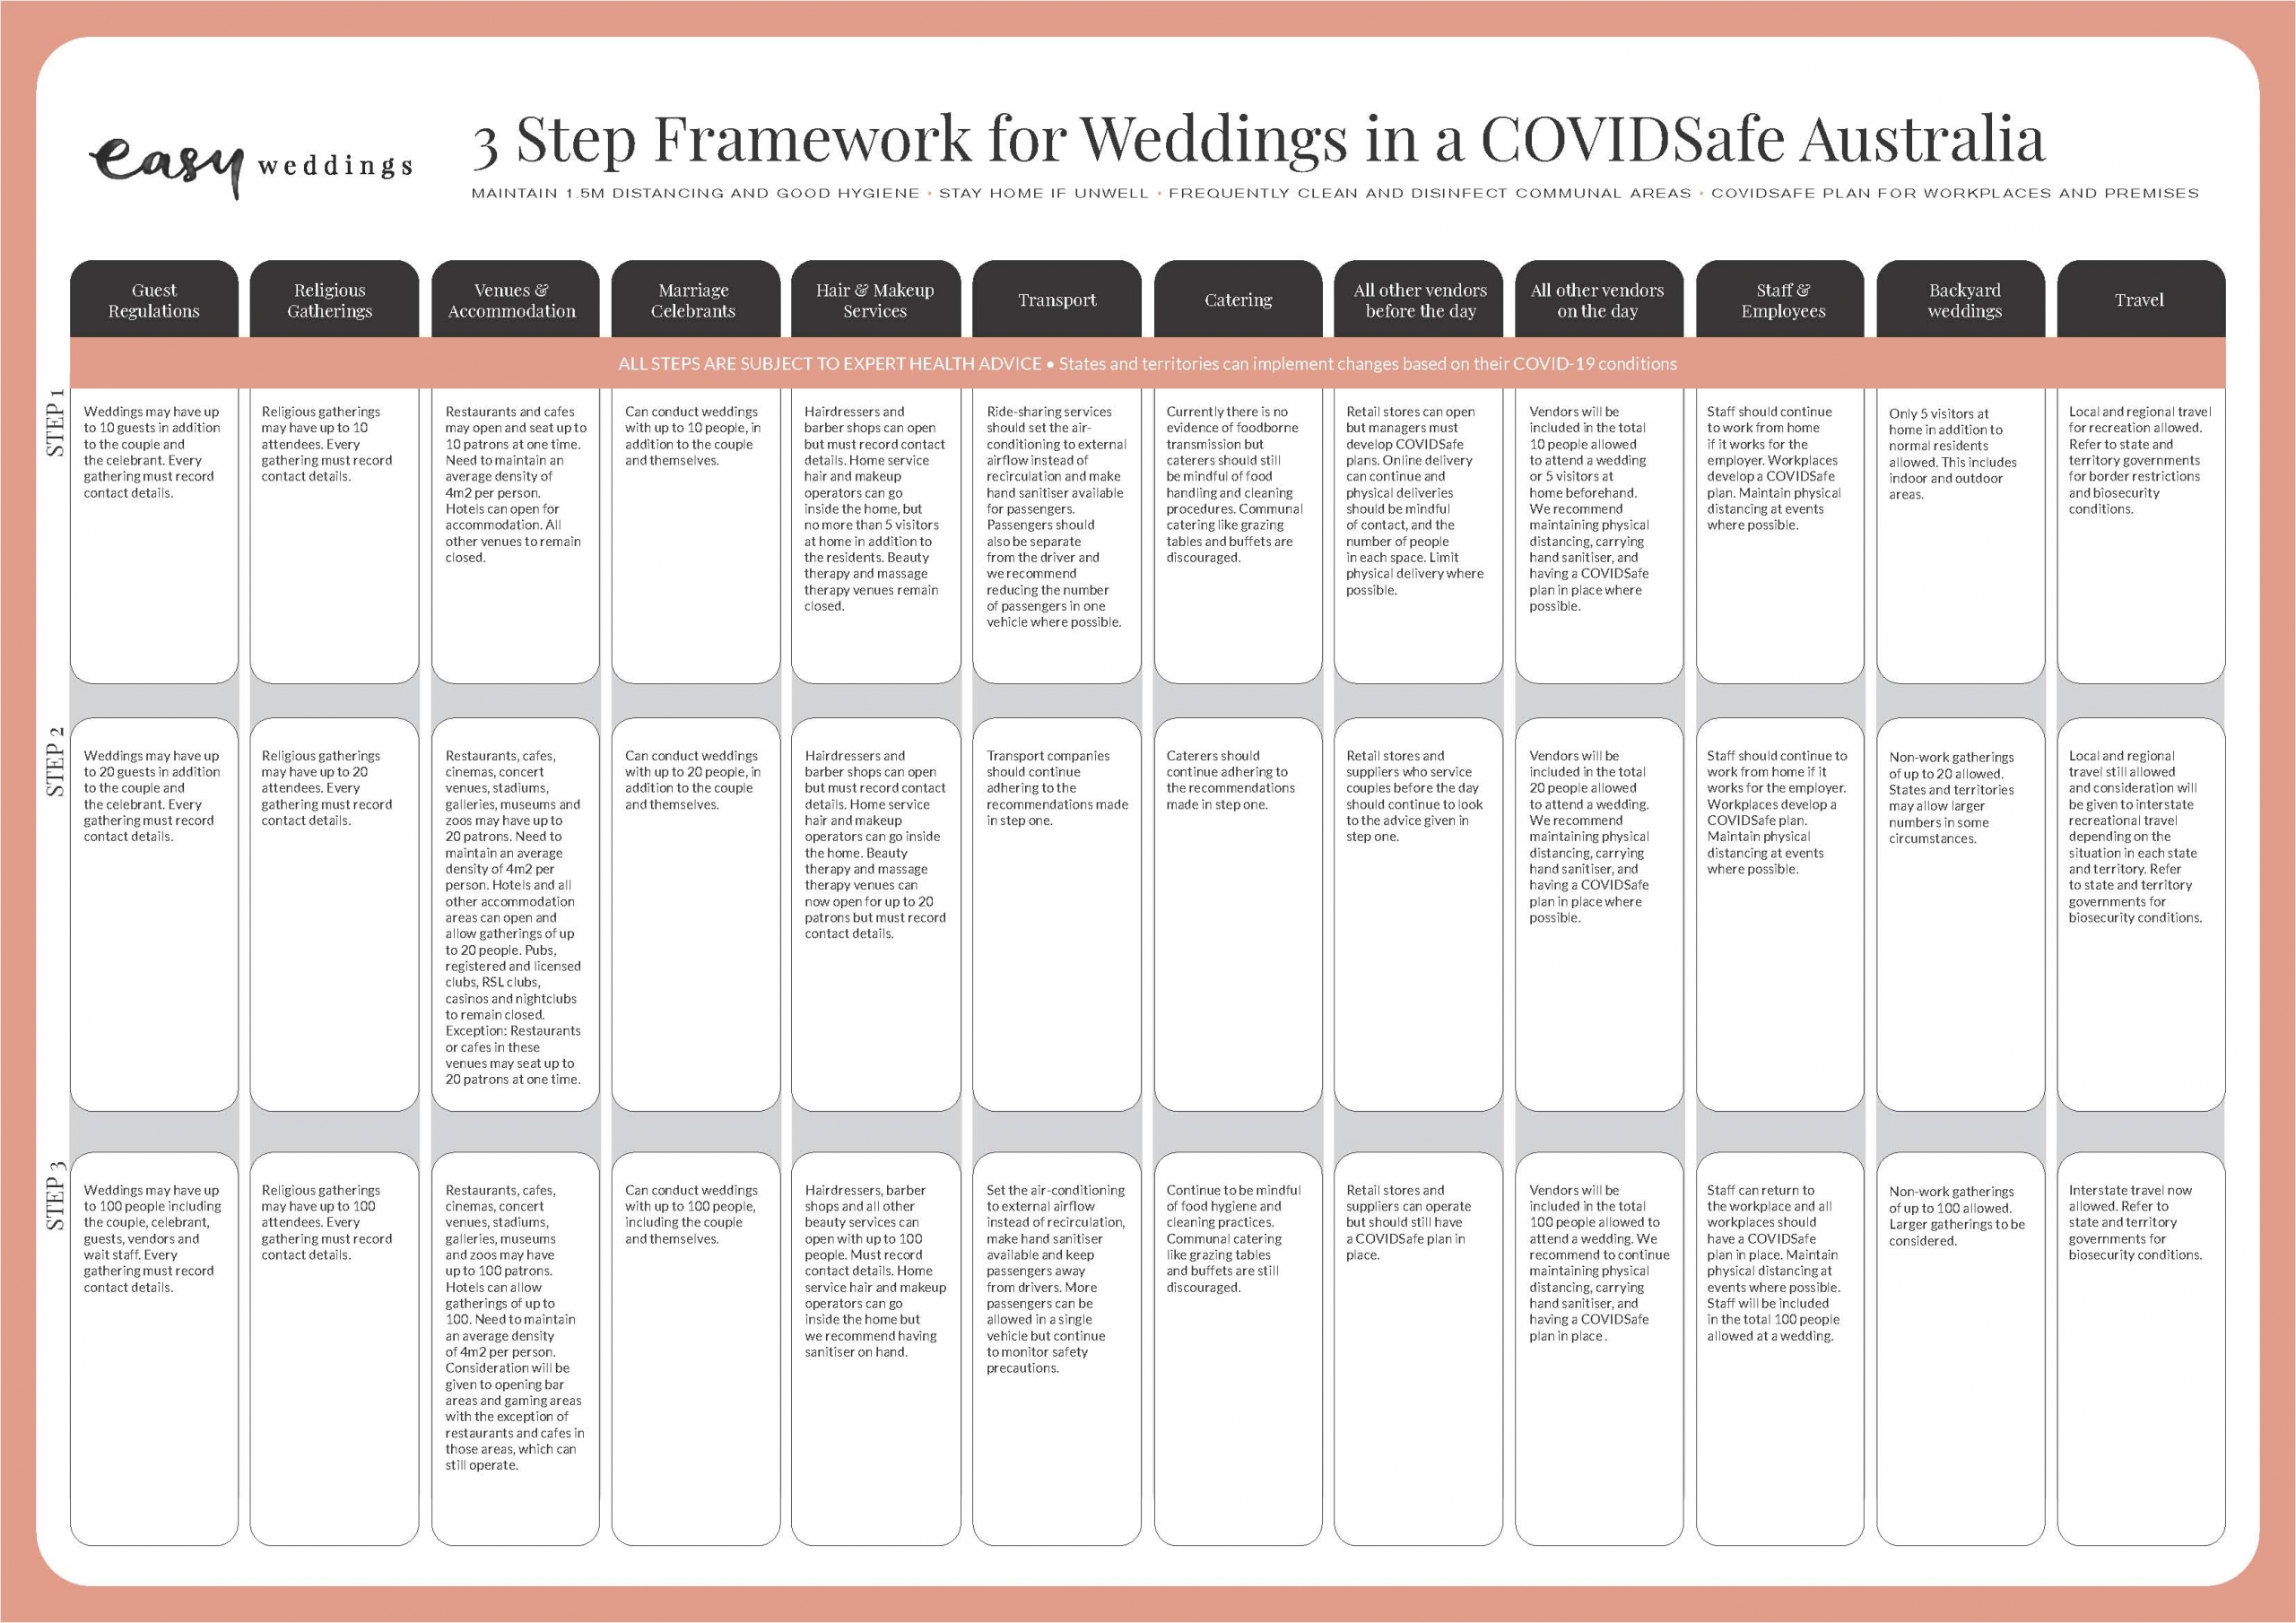 how to plan your wedding with Covid-19 restrictions